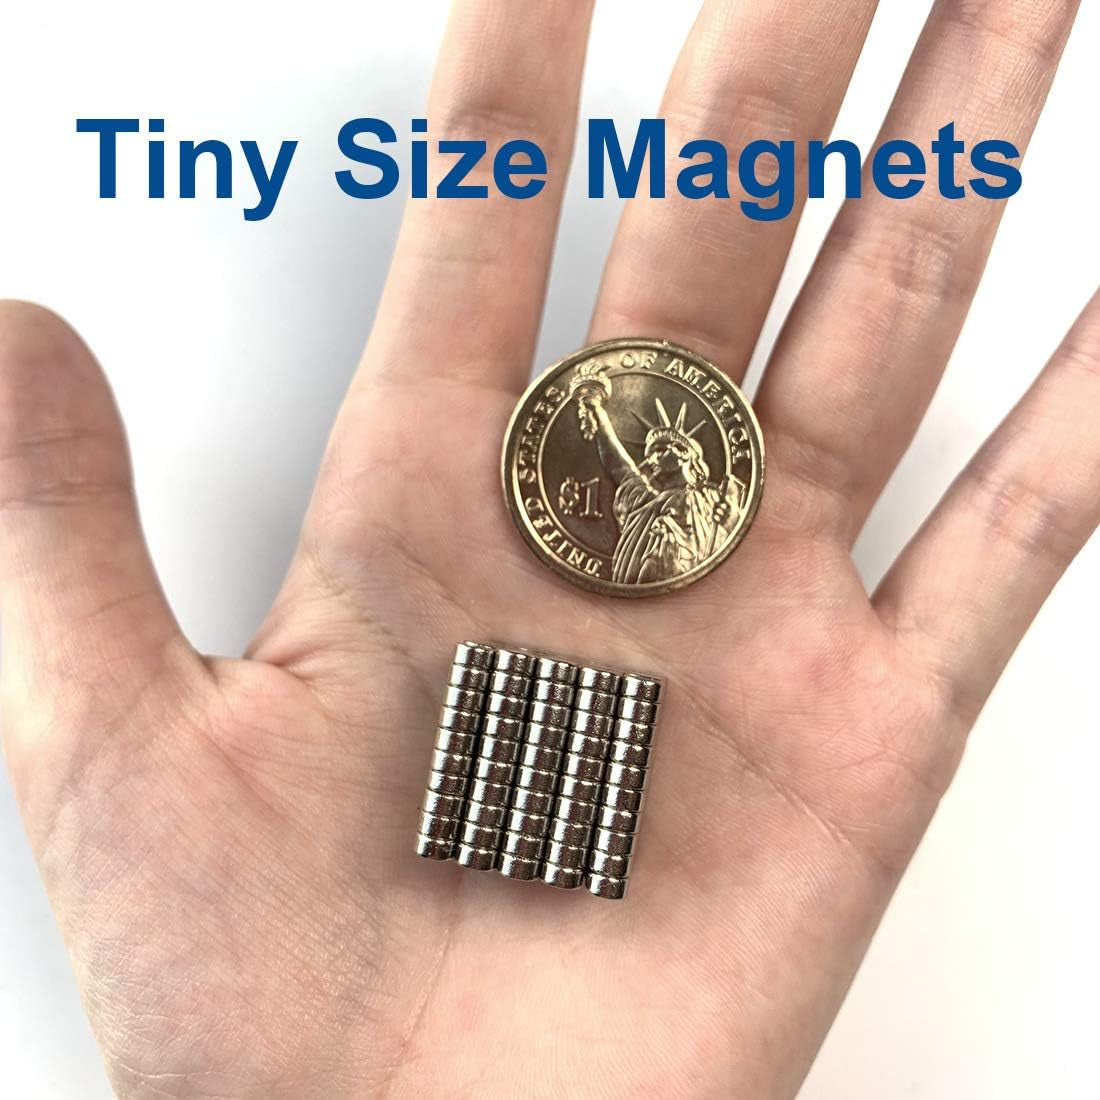 Magnets - 200 Tiny Magnets Mini Magnets Small round Magnets for Crafts - 4Mmx2Mm Magnets for Miniatures Small Models - Come with a Storage Case